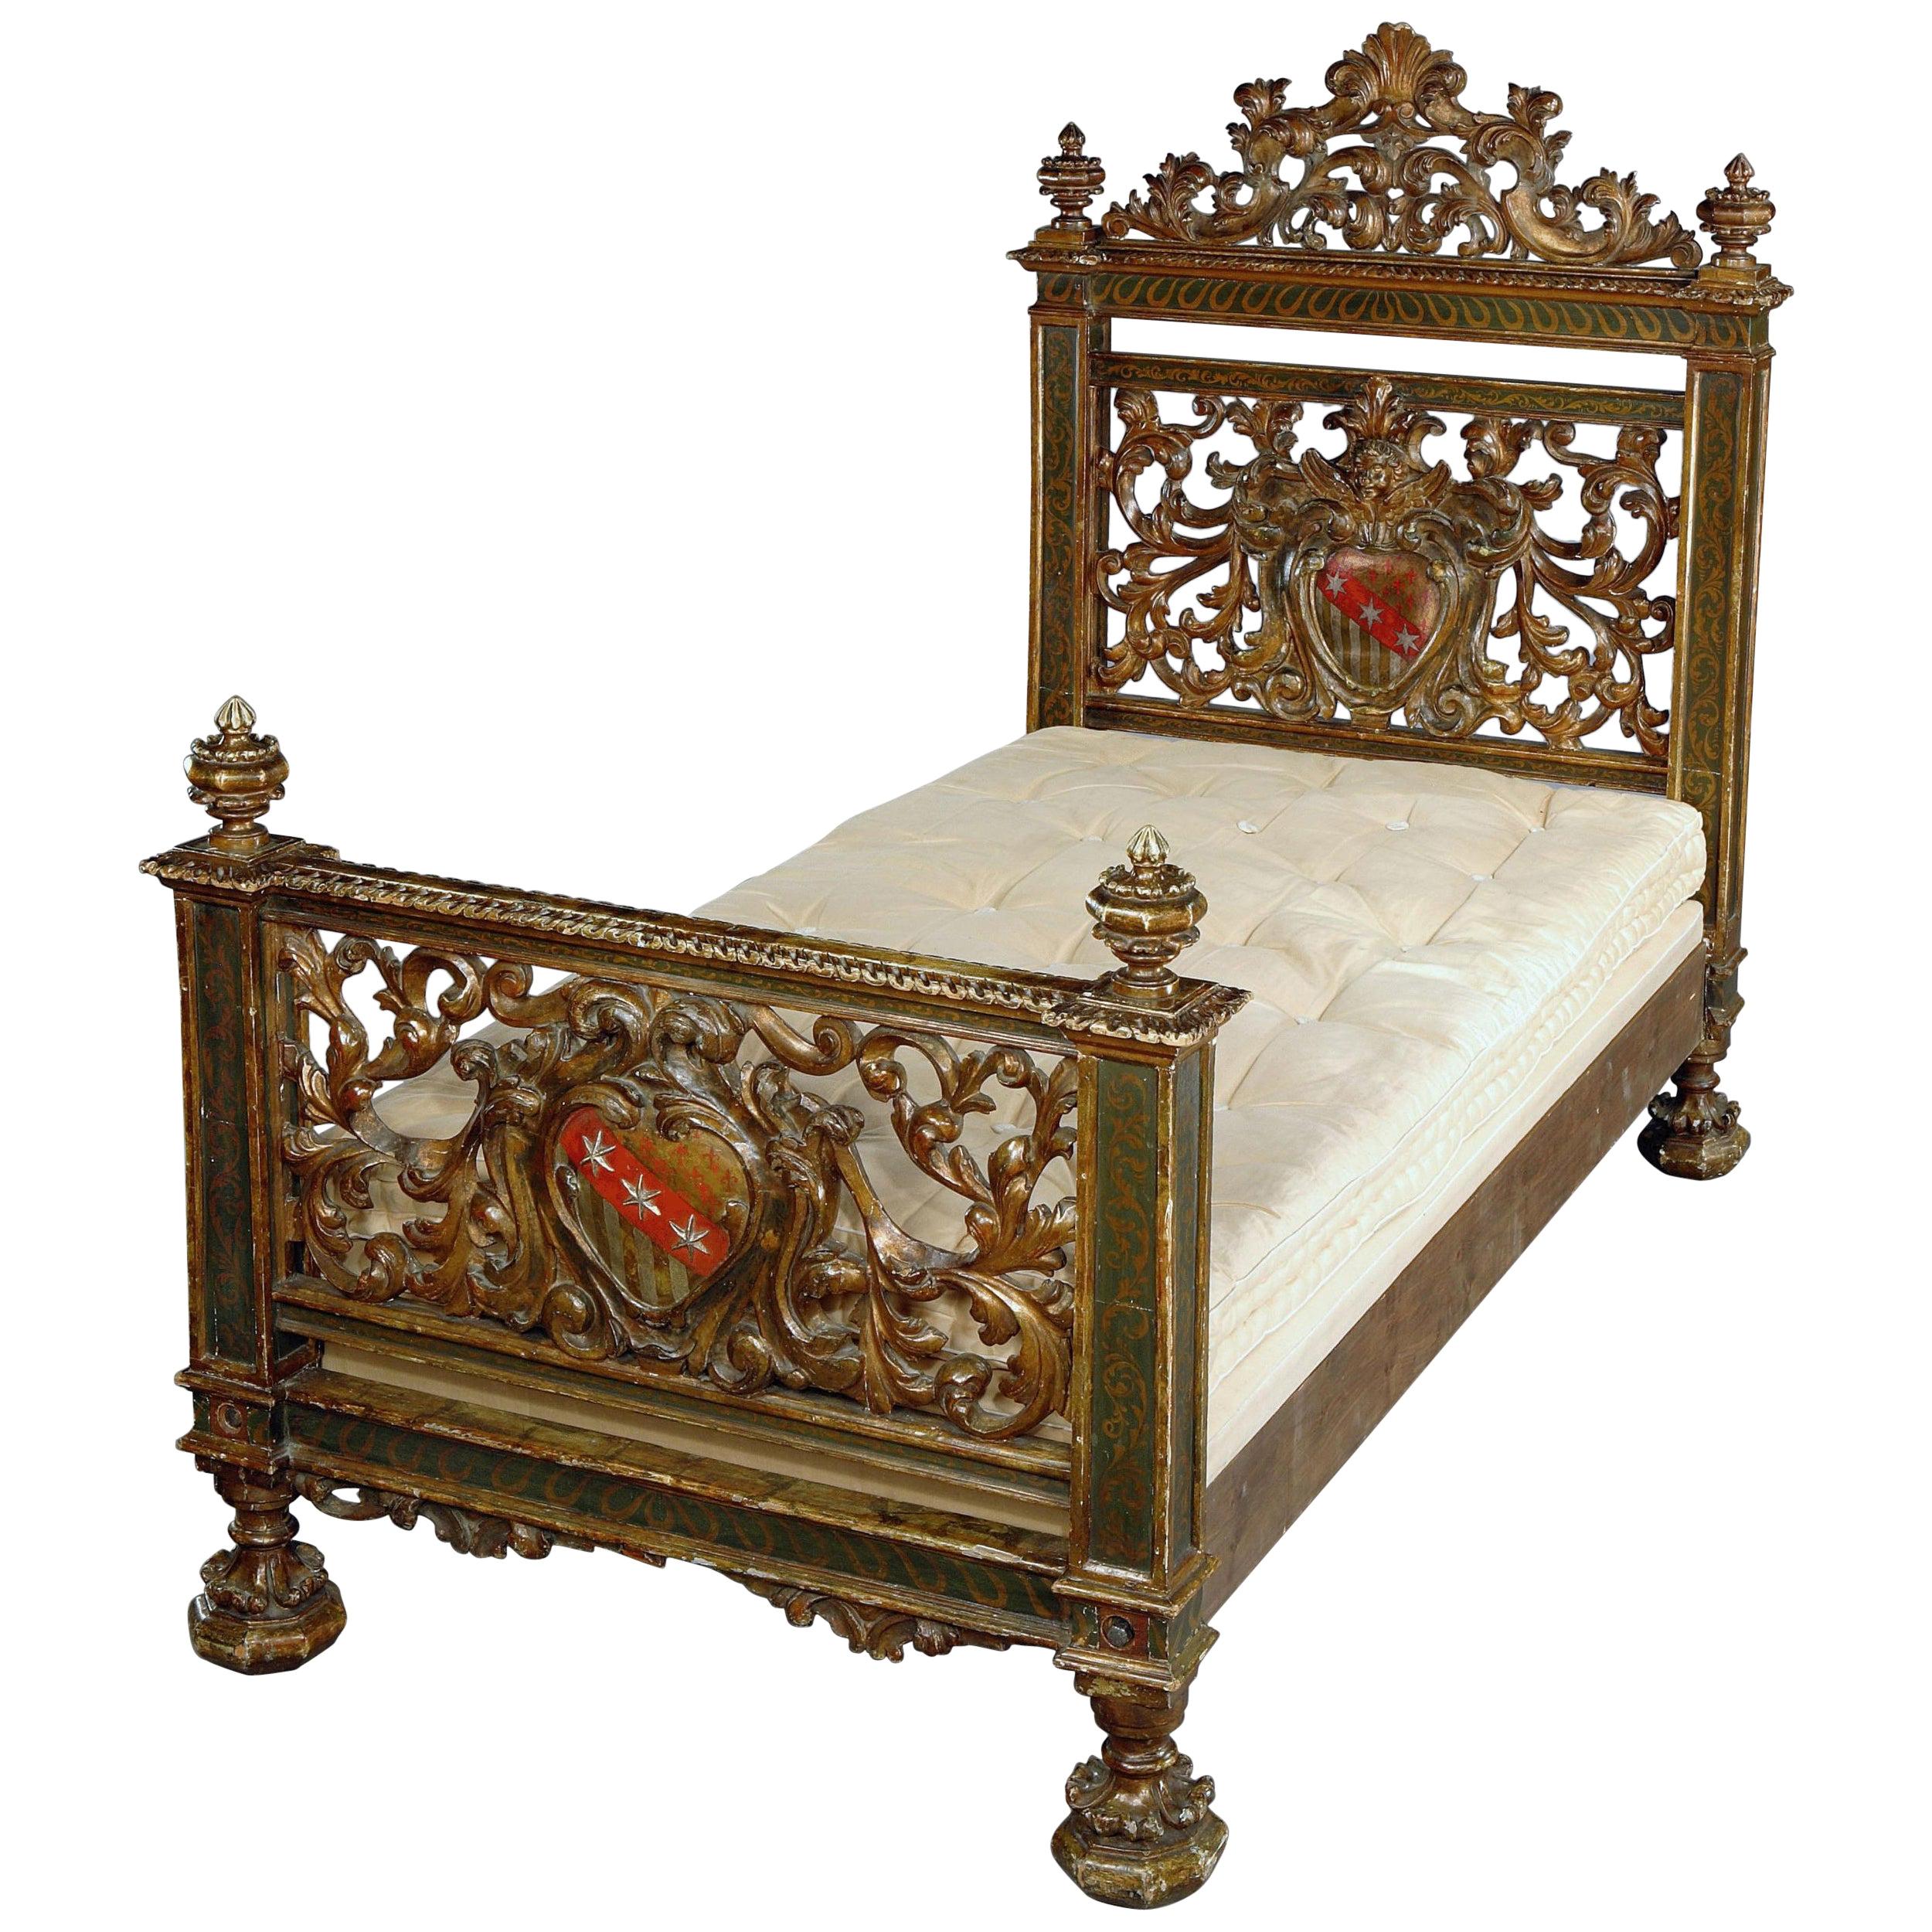 NEW STUNNING Victorian Baroque Ornate Scroll GOLD Metal BED CROWN CORNICE TESTER